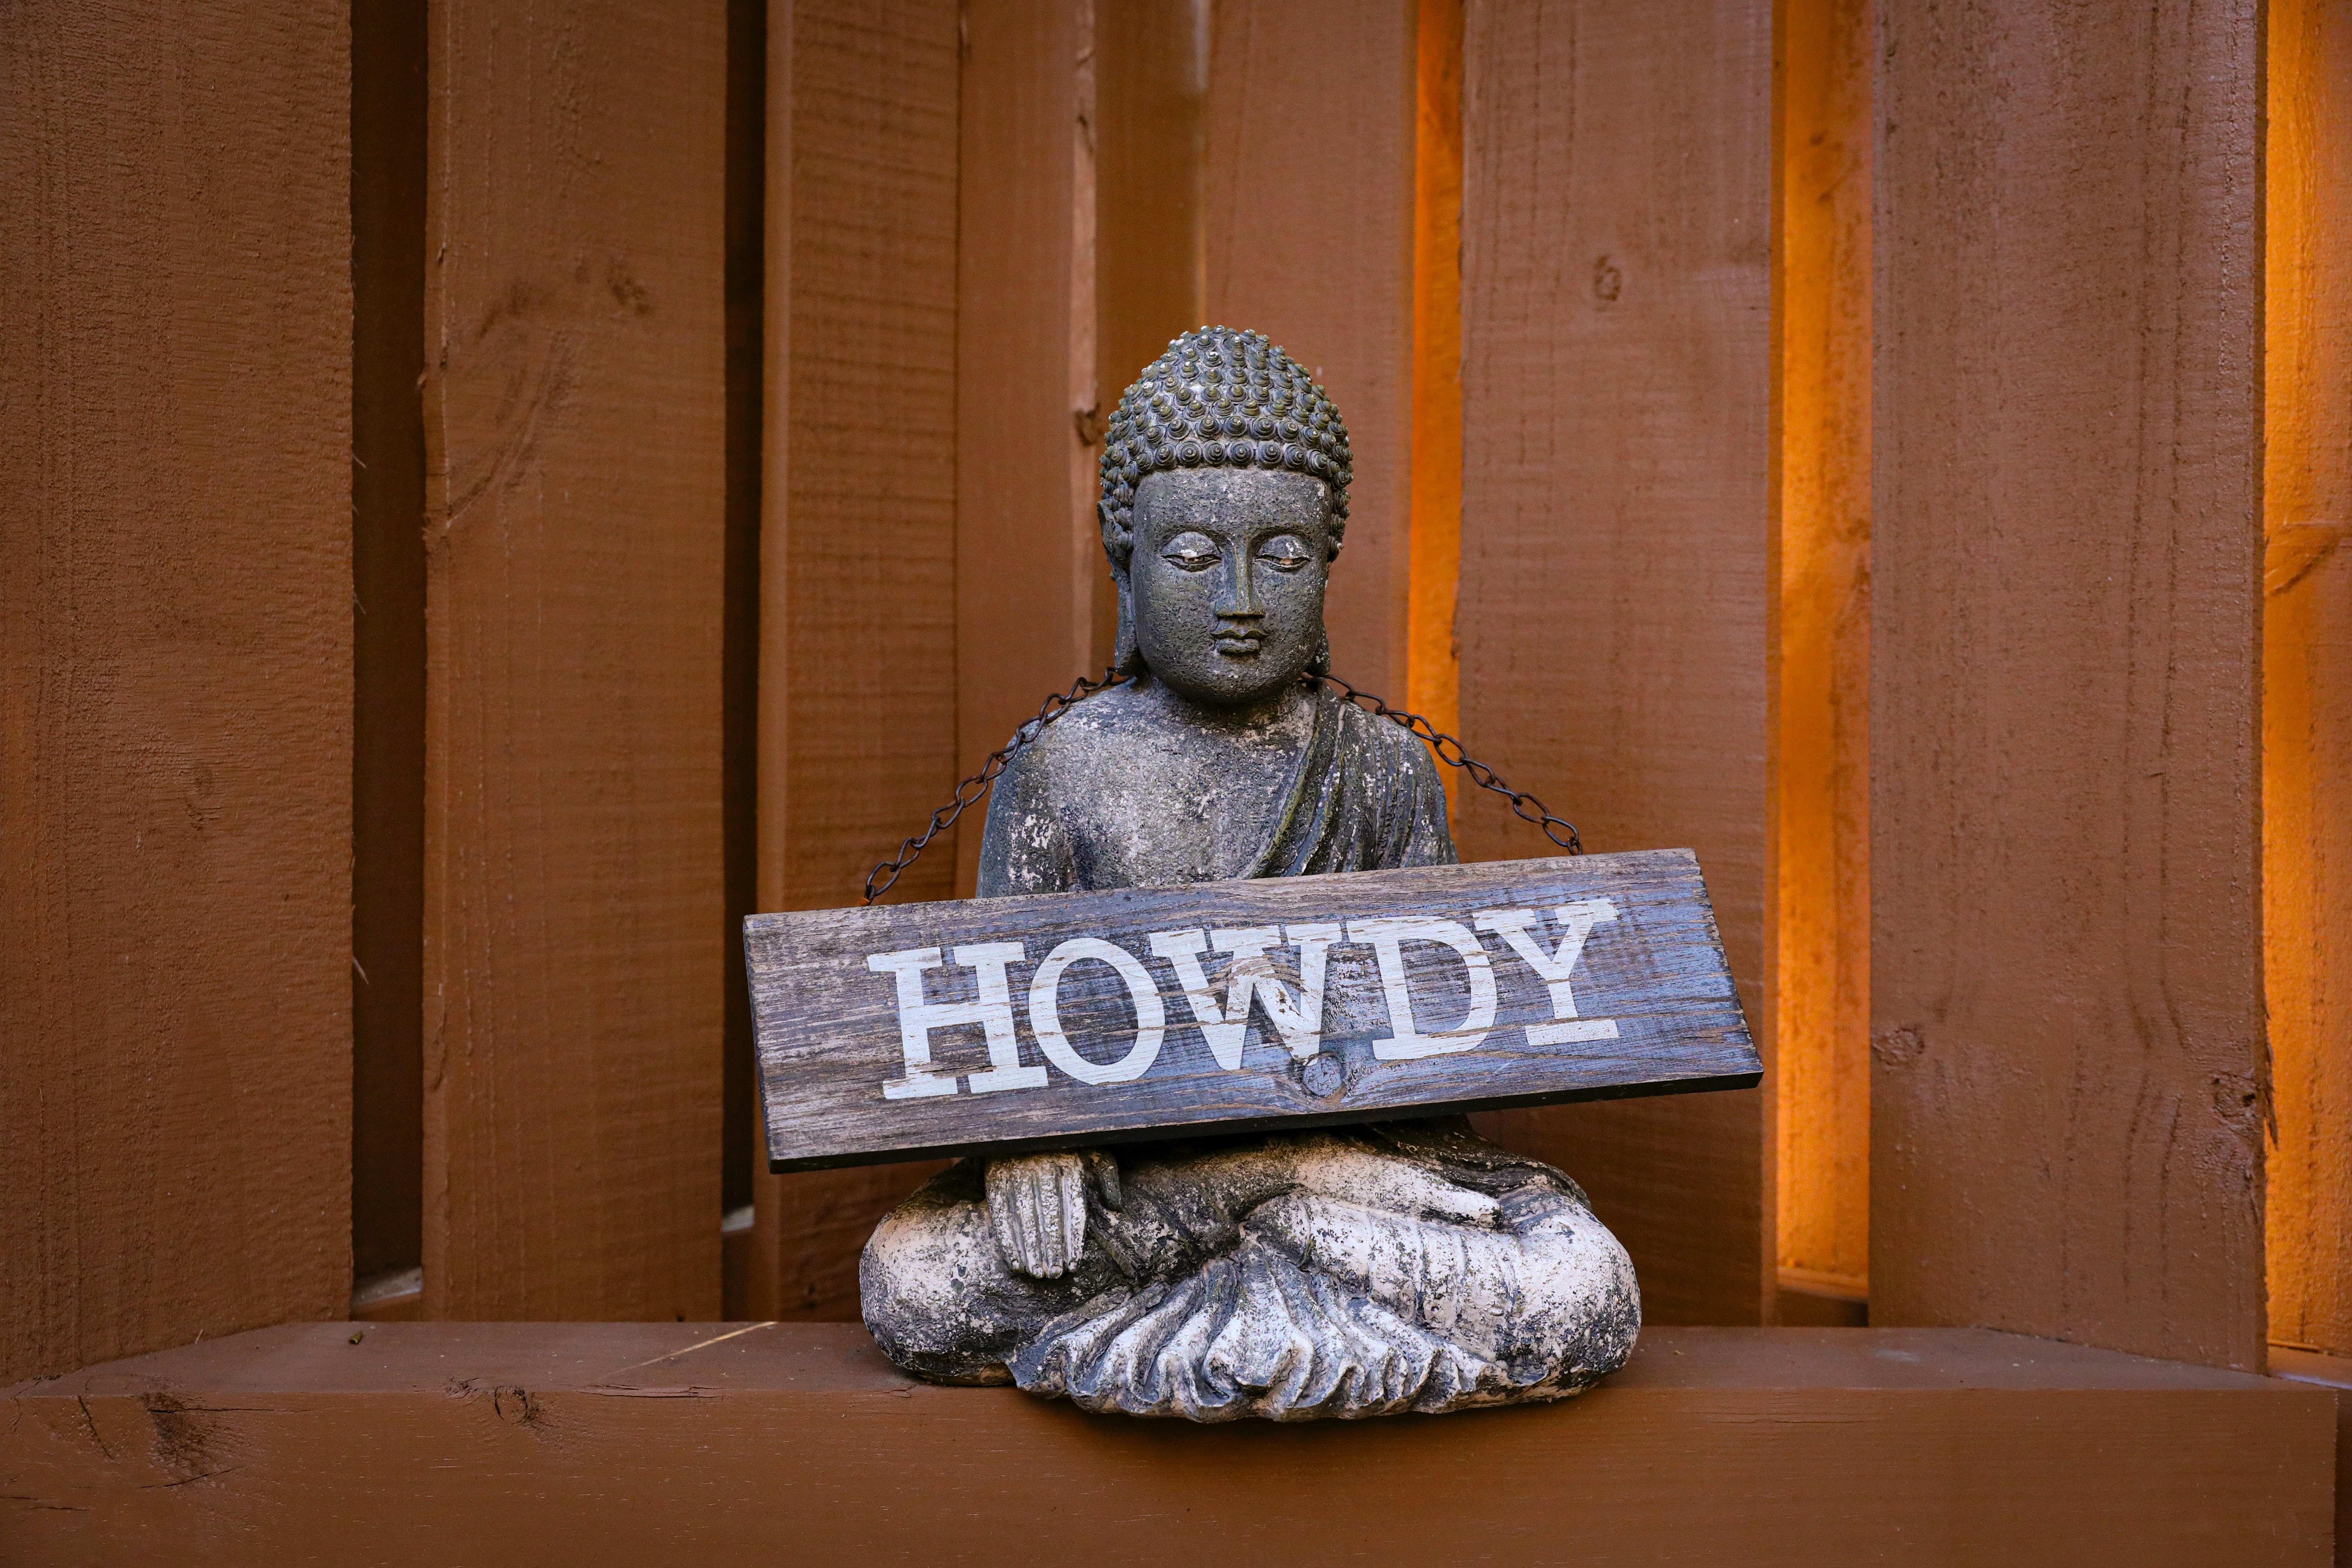 Photograph of meditating figure with sign that reads Howdy by Mick Haupt via Unsplash